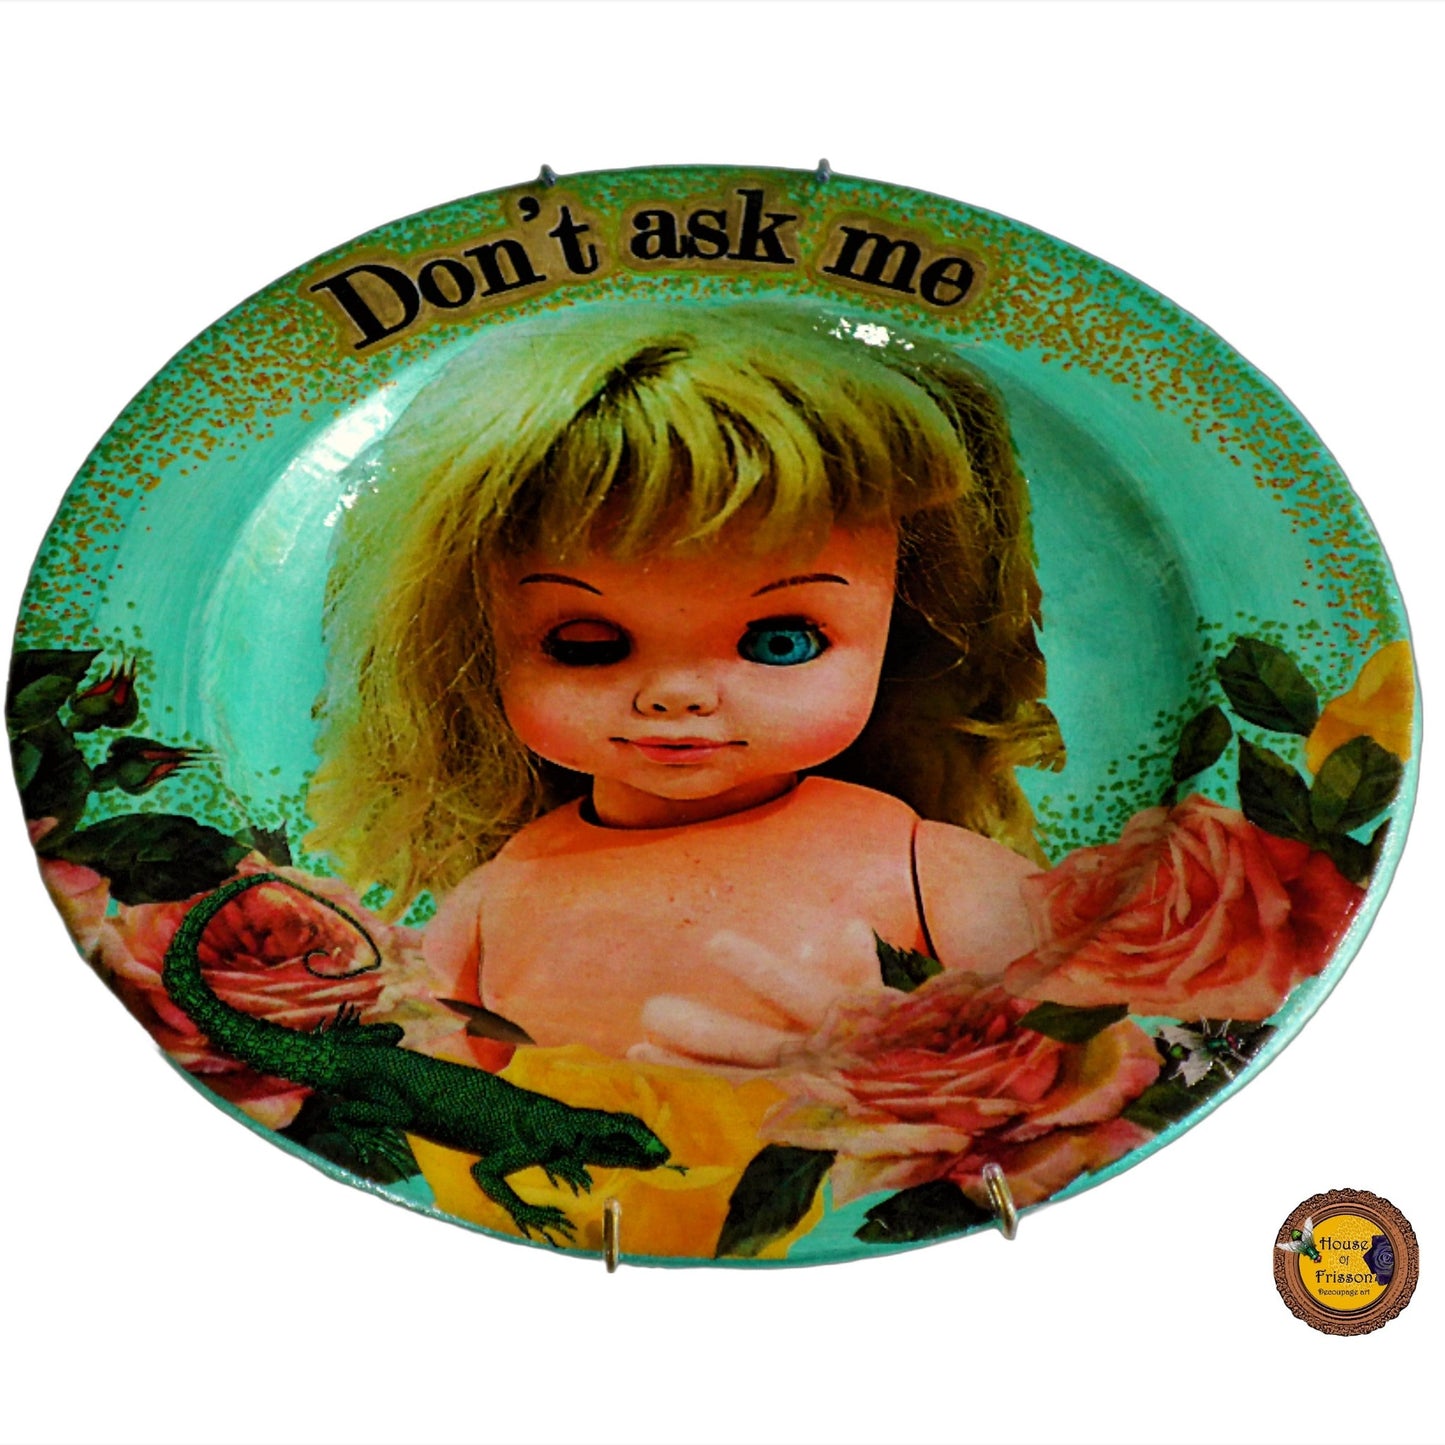 House of Frisson "Don't Ask Me" Green Wall Plate Front. Collage artwork featuring a vintage doll with funny face, surrounded by roses, and a lizard. Closeup details.